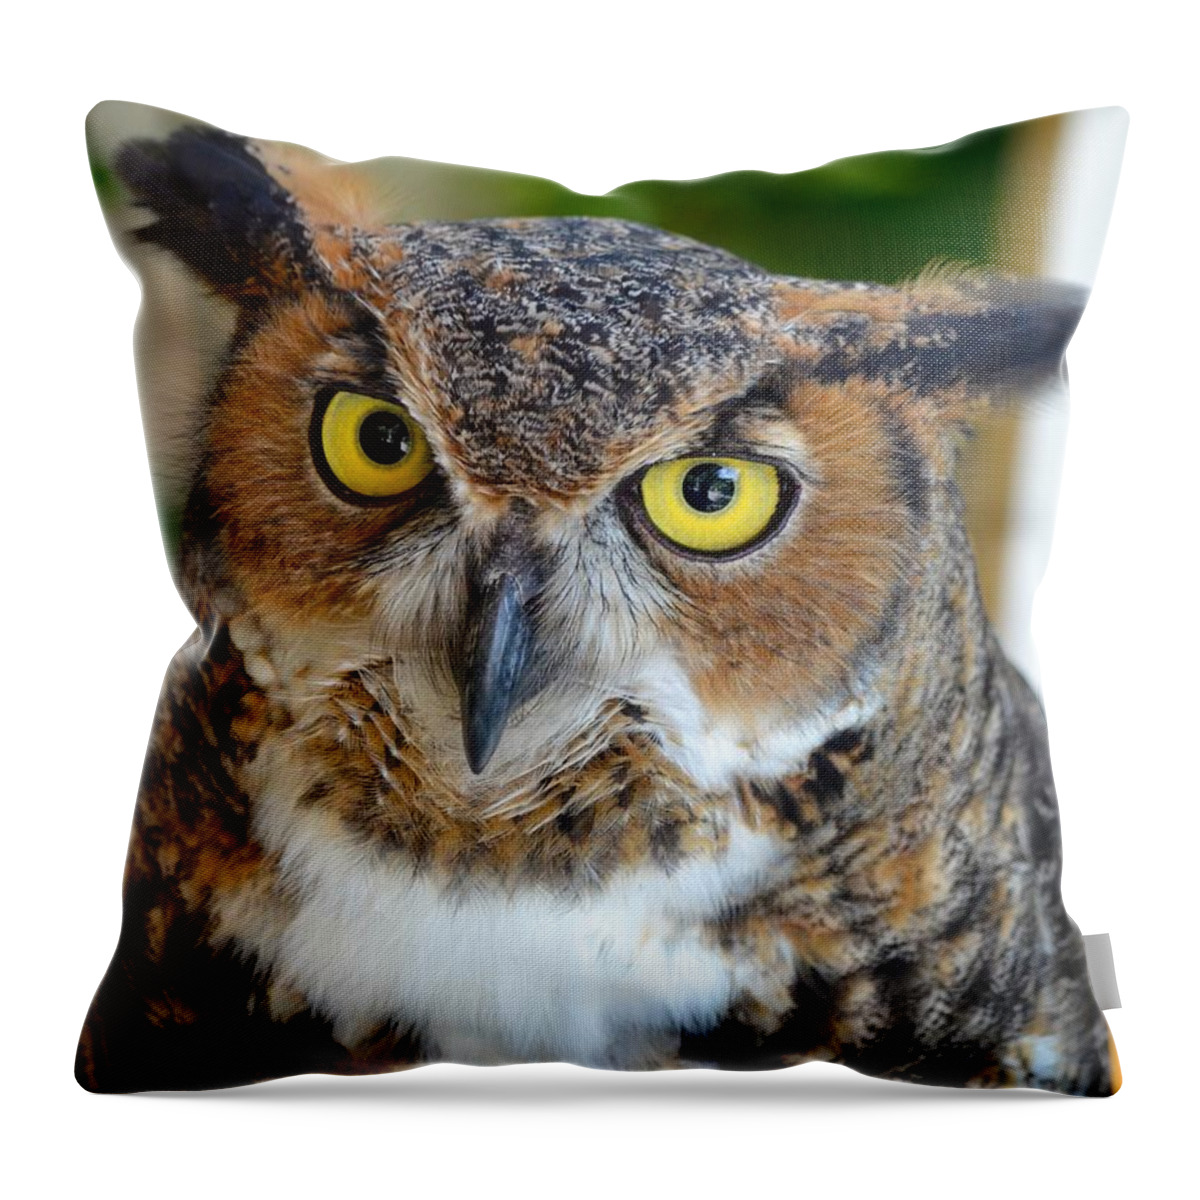 Owl Throw Pillow featuring the photograph Great Horned Owl by Richard Bryce and Family